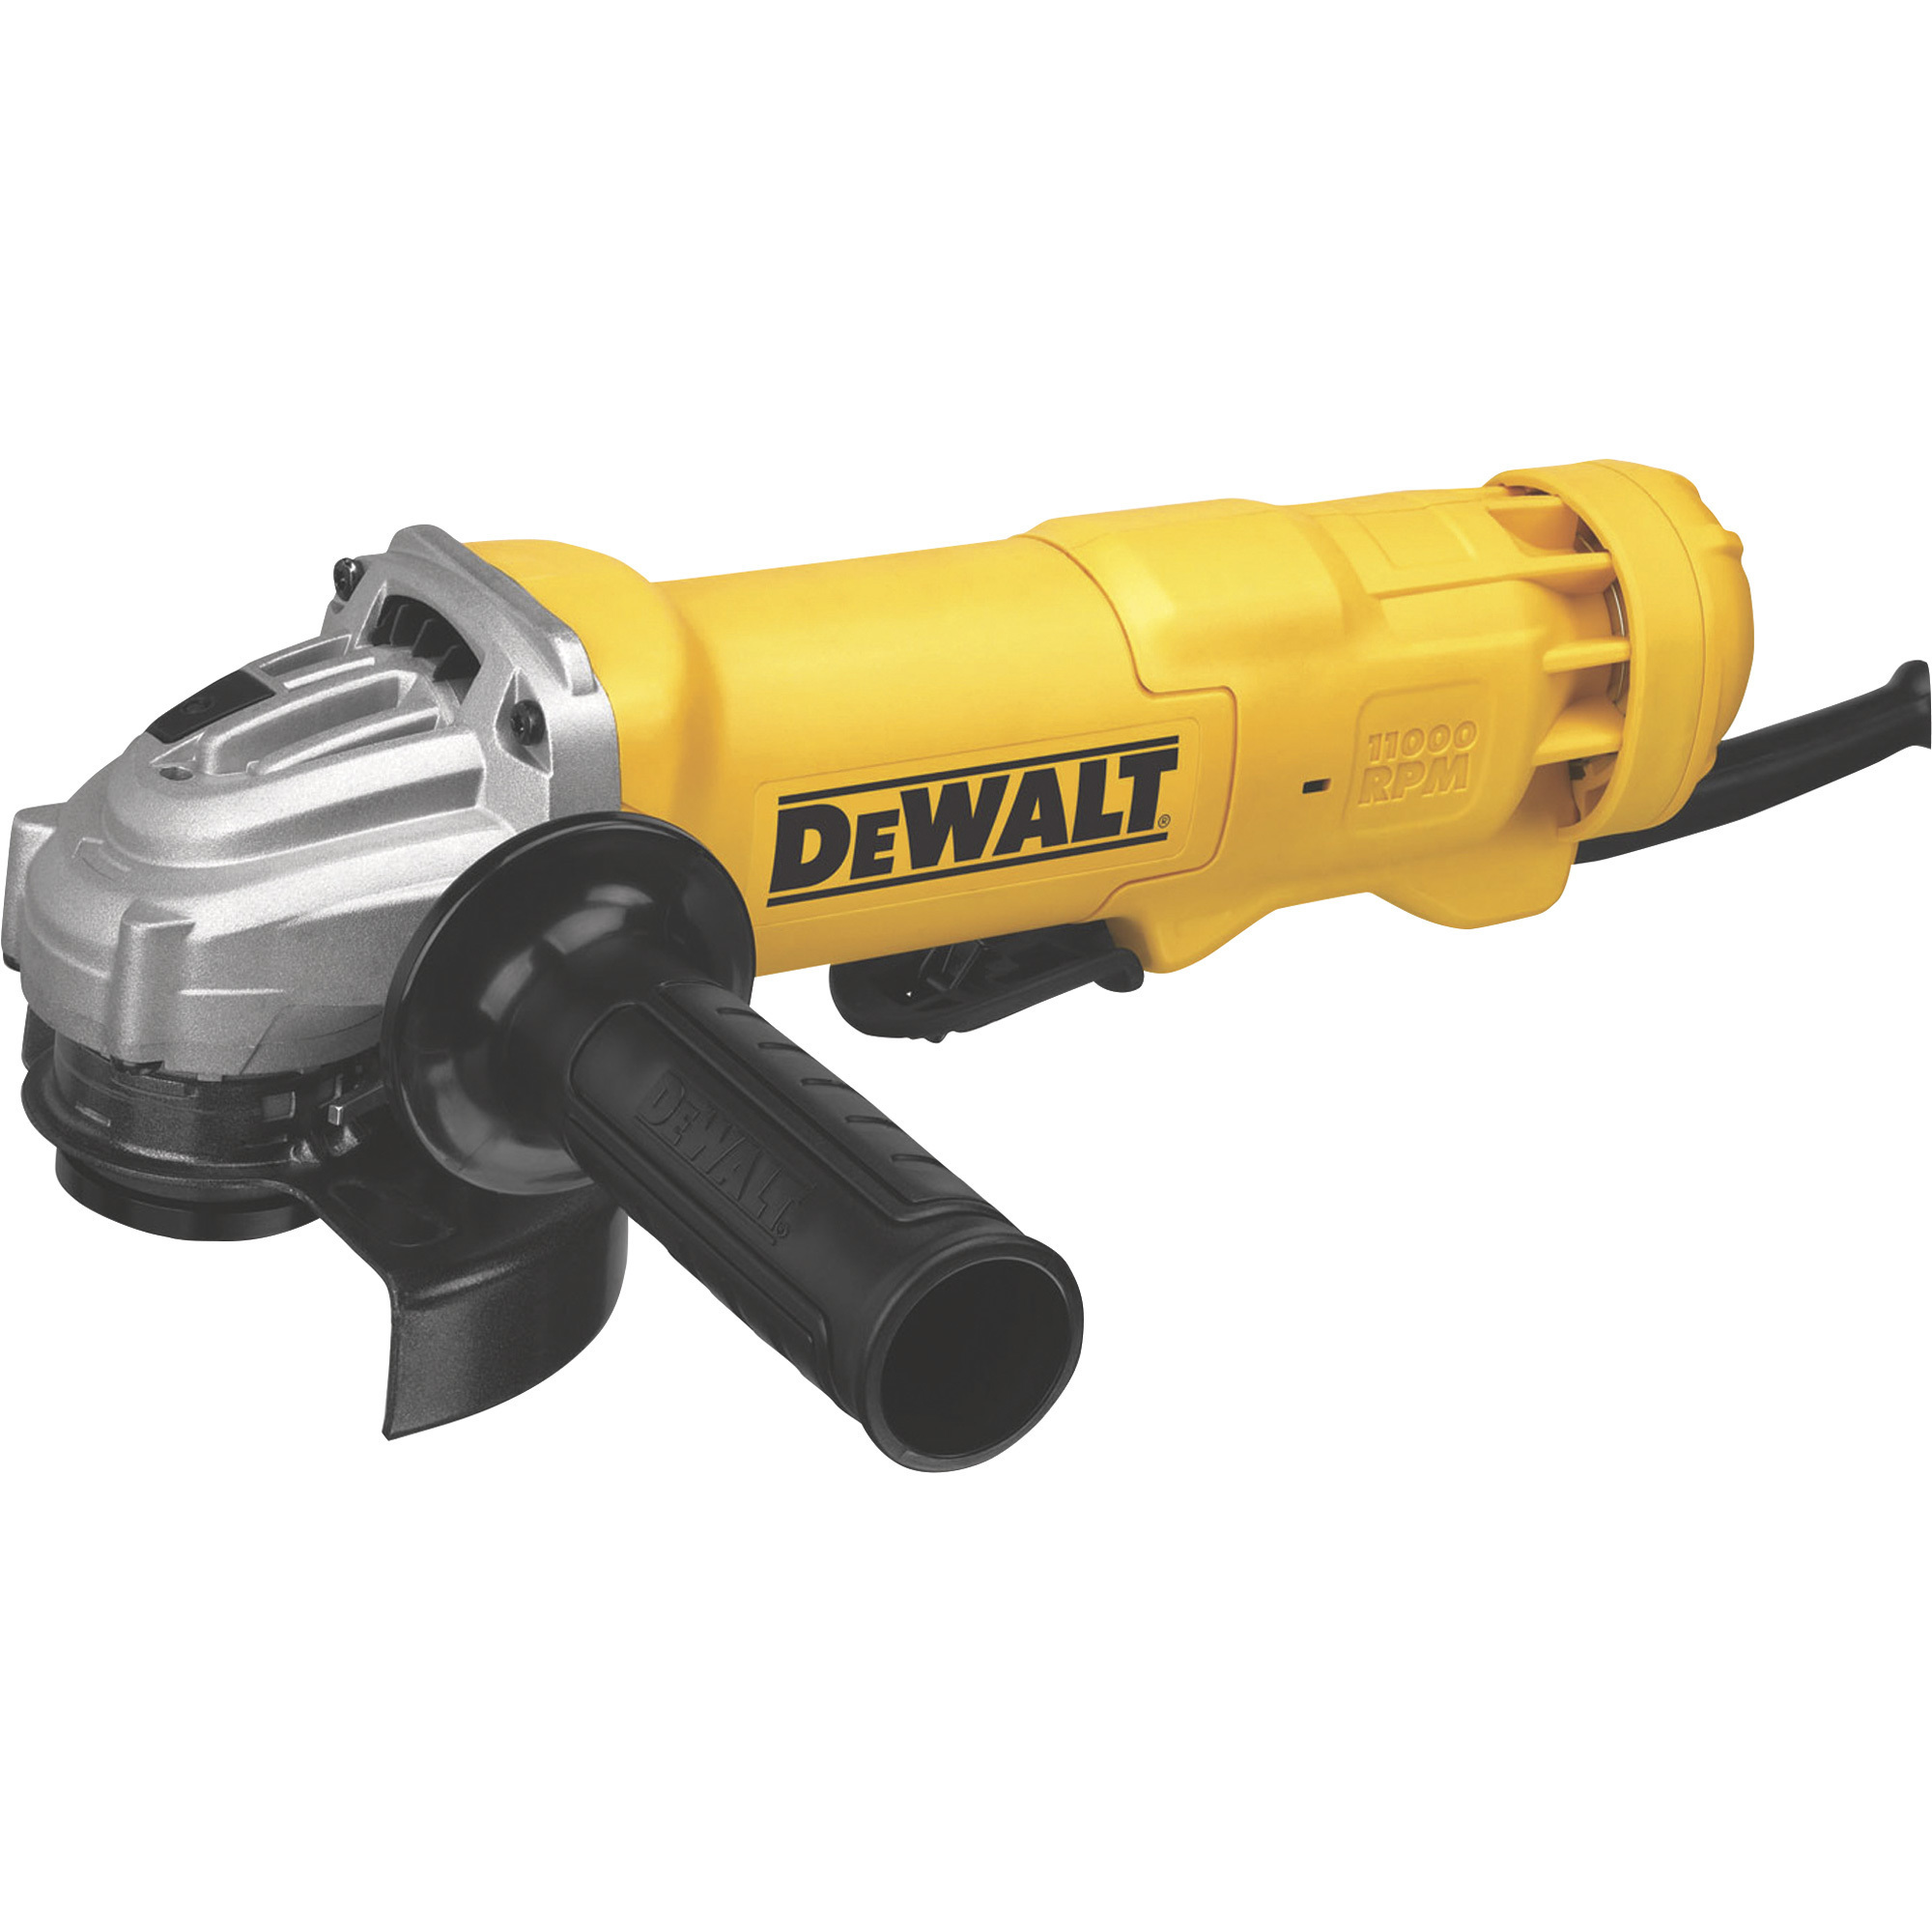 DEWALT 4 1/2Inch Compact Small Angle Grinder, 11 Amp, 11,000 RPM, Paddle Switch, Model DWE402